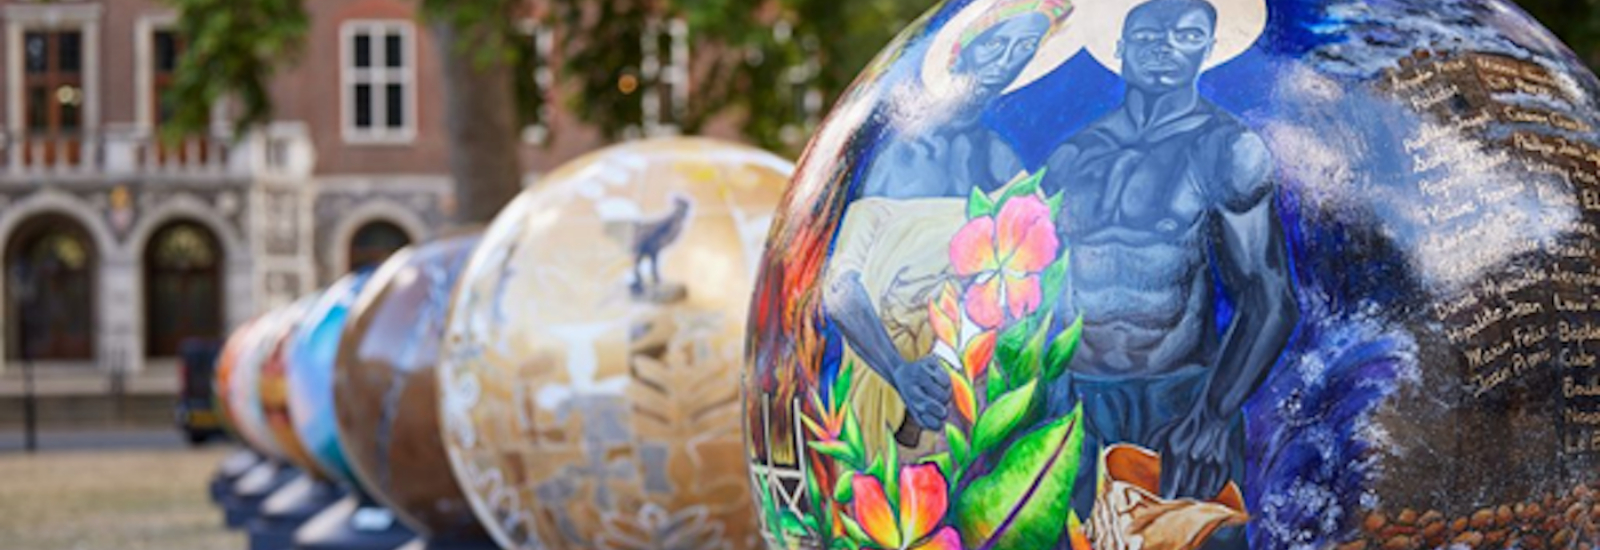 A trail of globes with artwork on